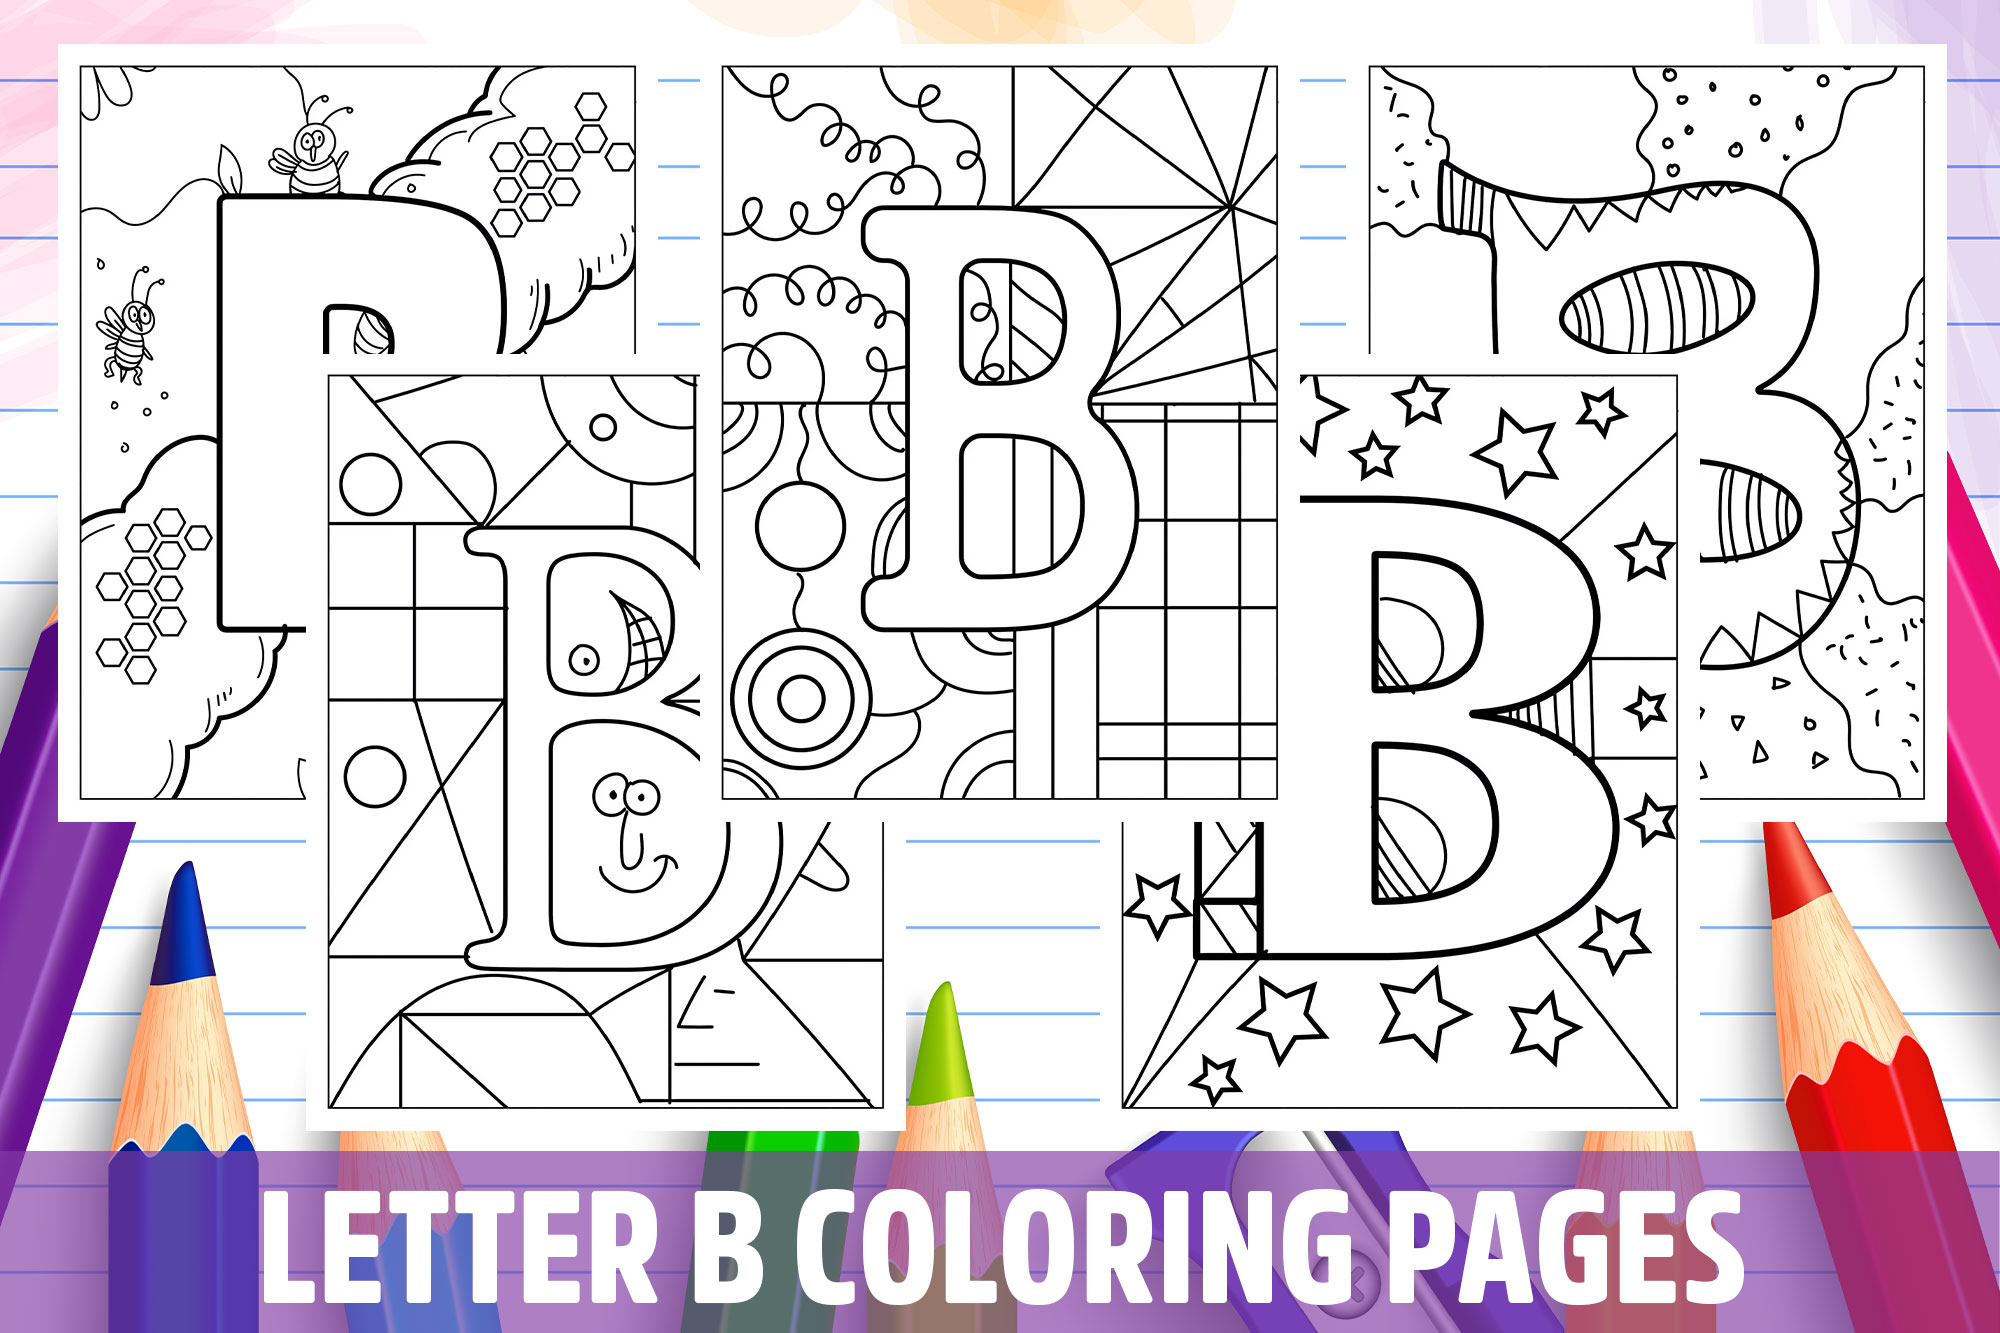 Letter b coloring pages for kids girls boys teens birthday school activity made by teachers